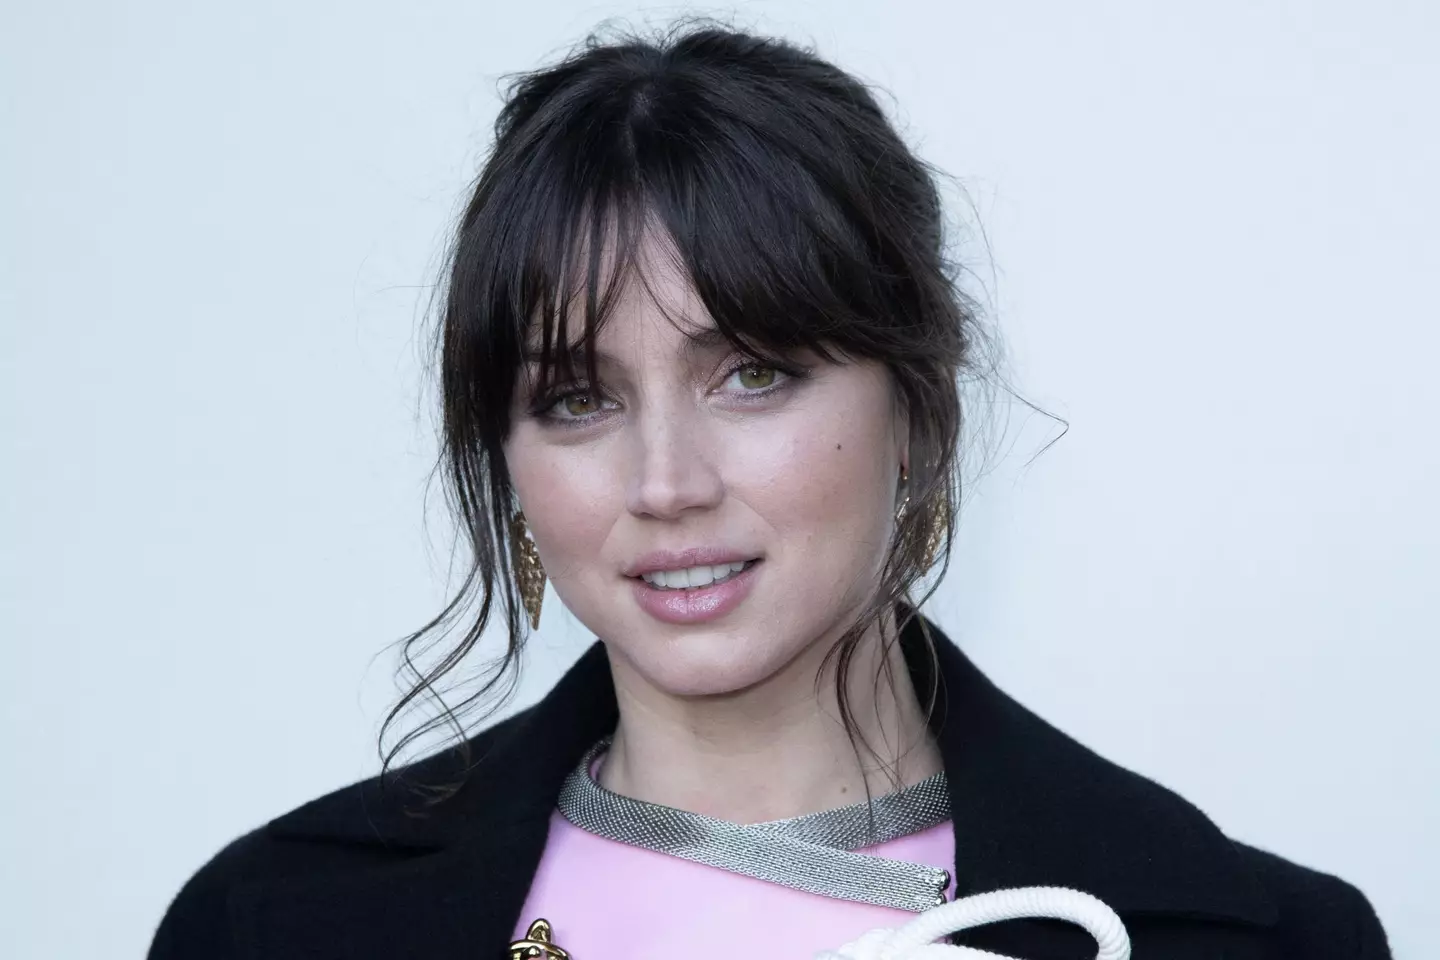 Ana de Armas is set to star is Monroe in the upcoming flick.